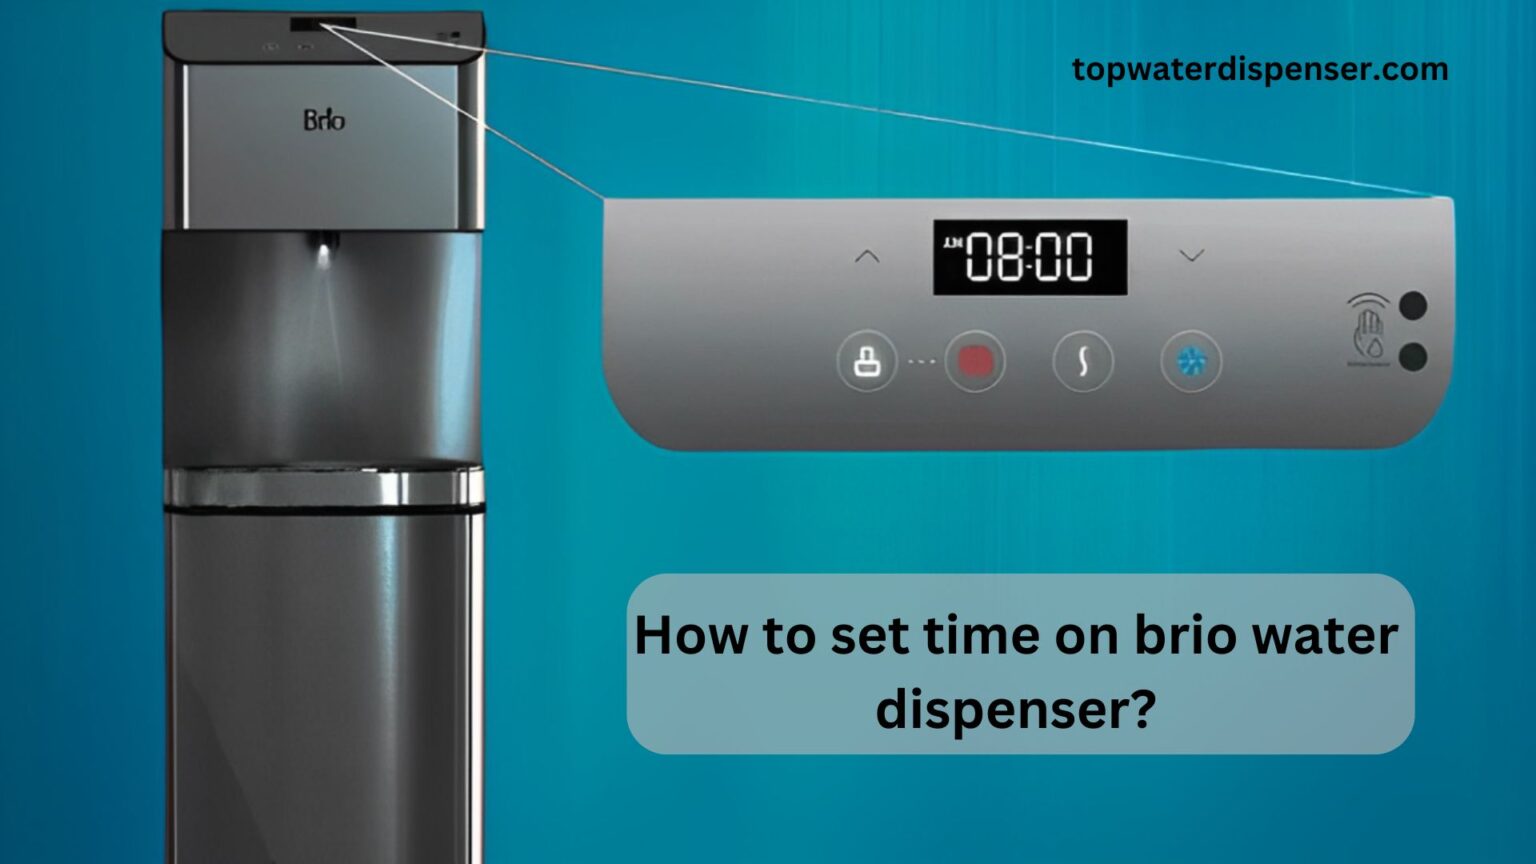 How to set time on brio water dispenser?